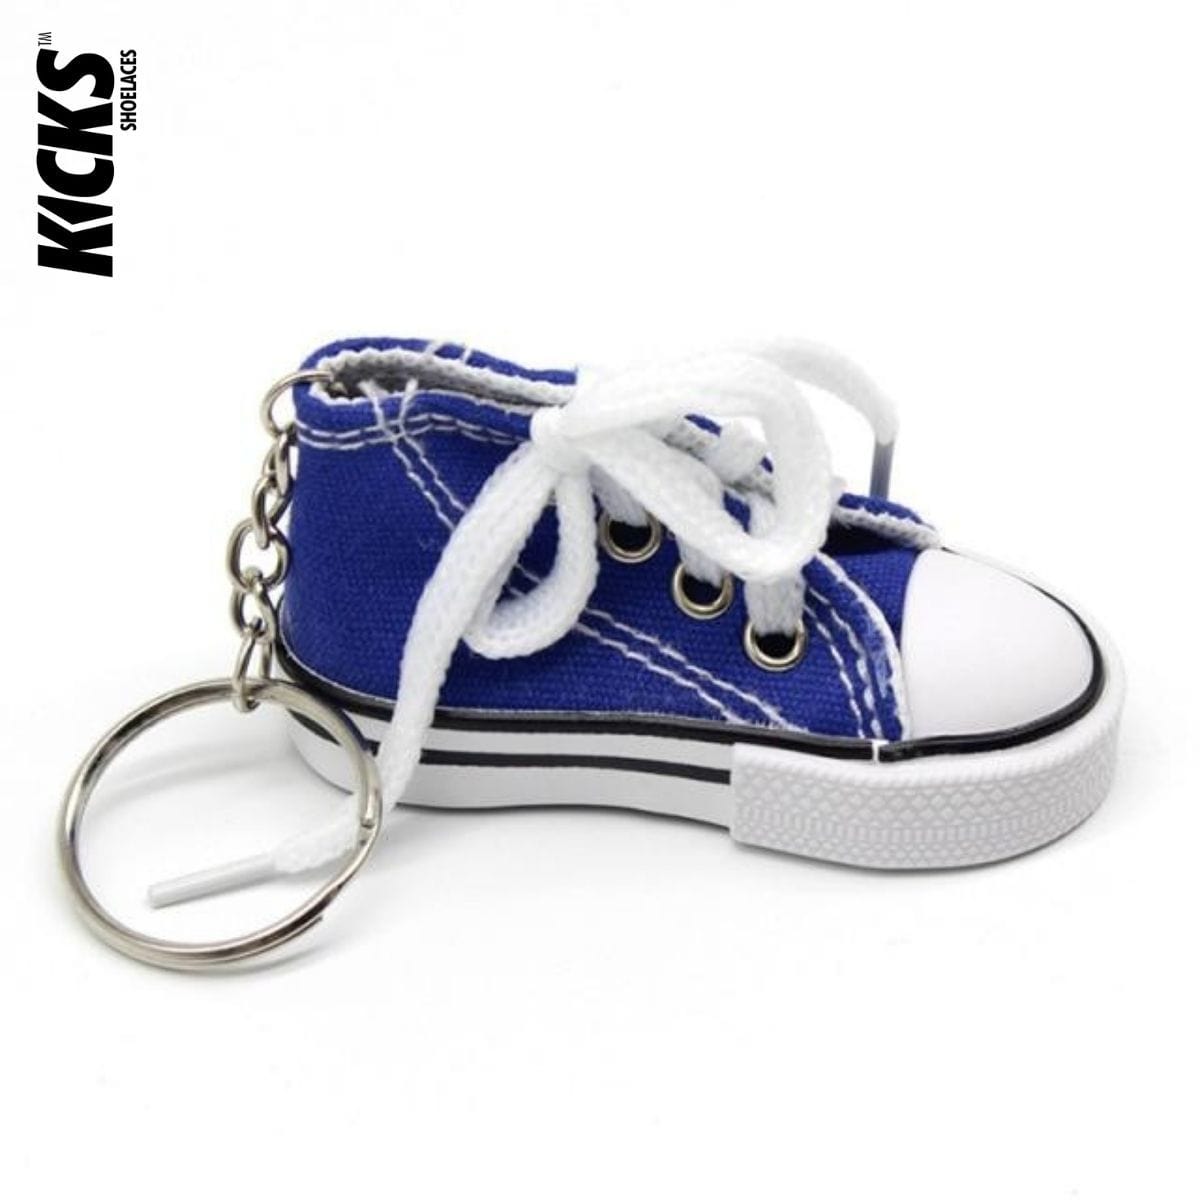 blue-high-top-sneaker-keychain-perfect-gift-best-charm-accessories.jpg